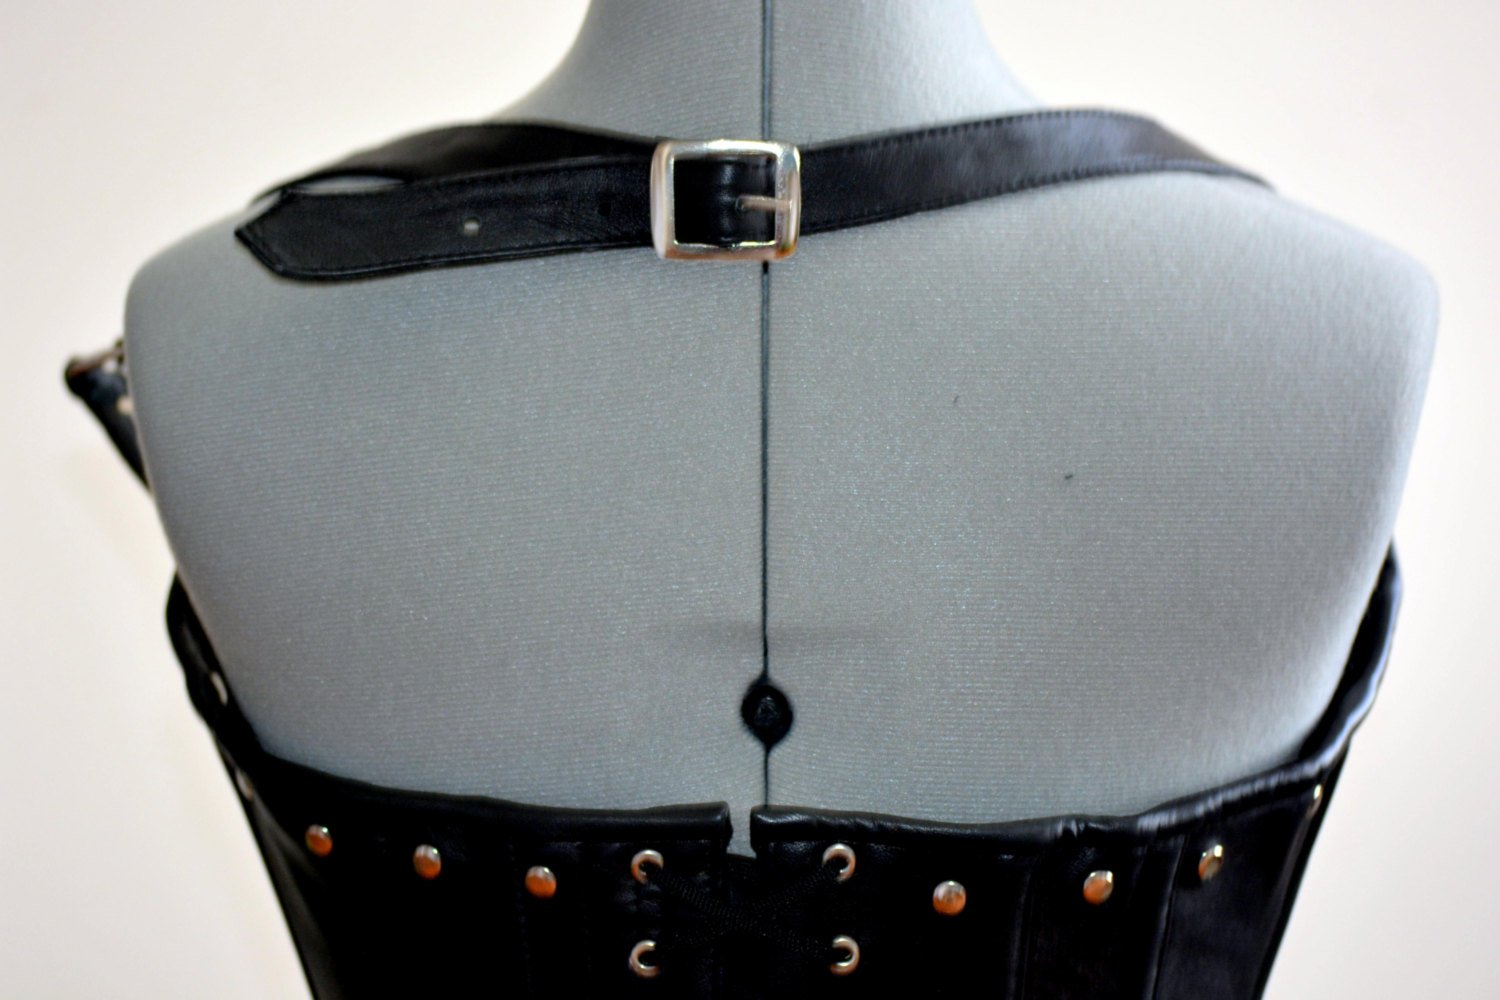 Real leather steampunk/gothi style underbust corset vest with metal de –  Corsettery Authentic Corsets USA